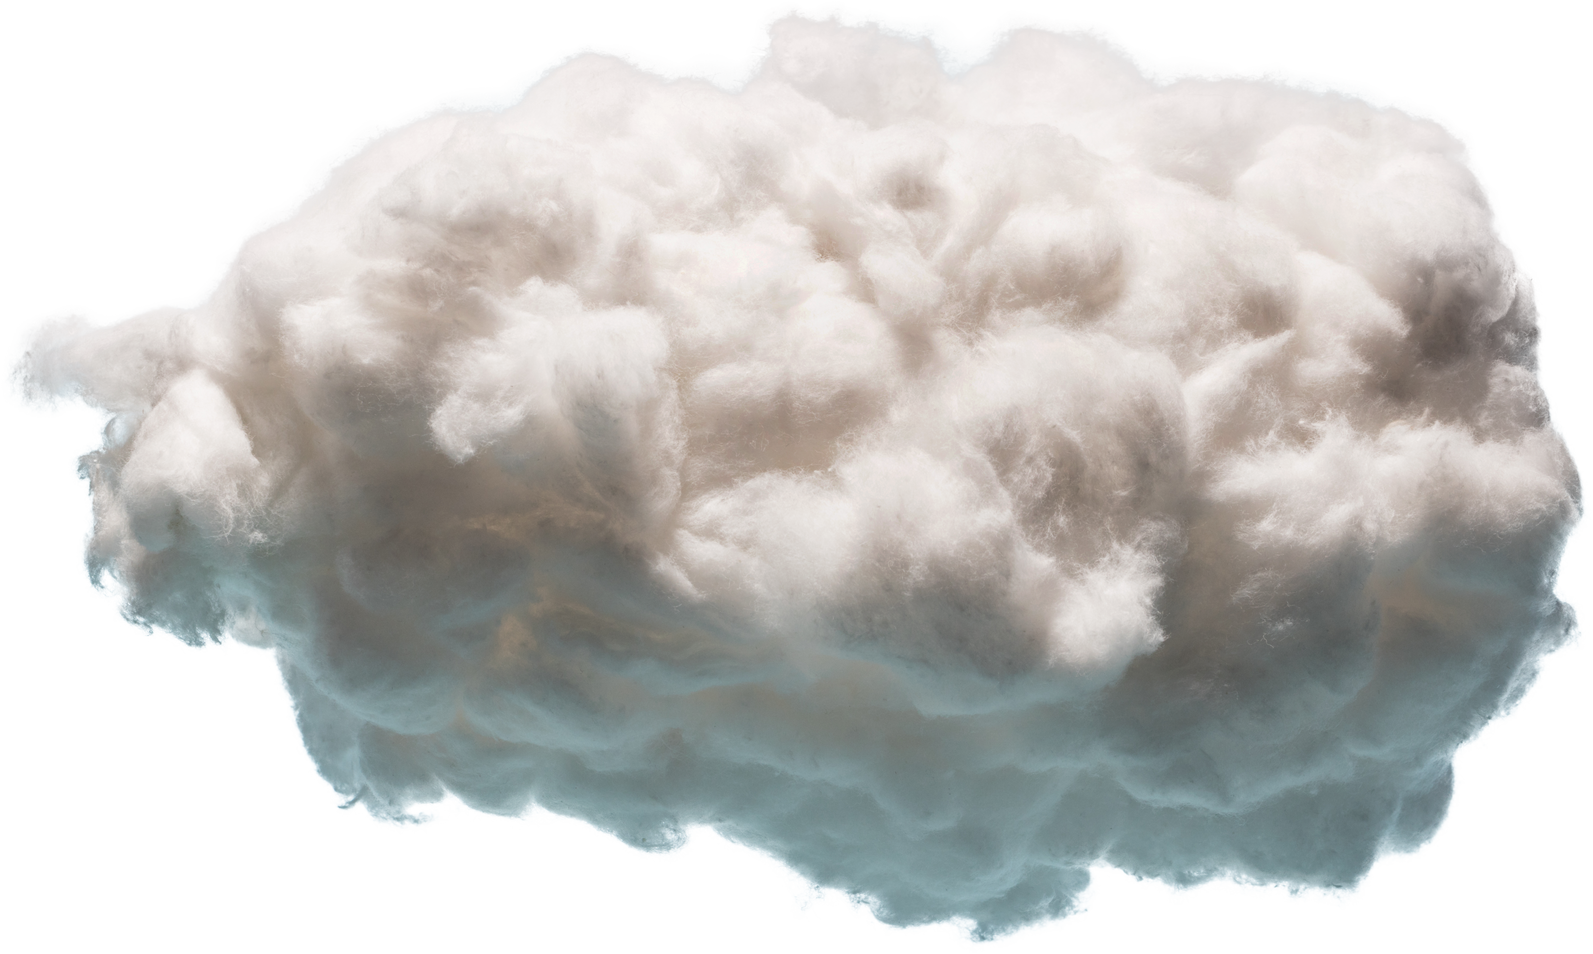 Stormy rainy cotton wool cloud isolated on transparent background